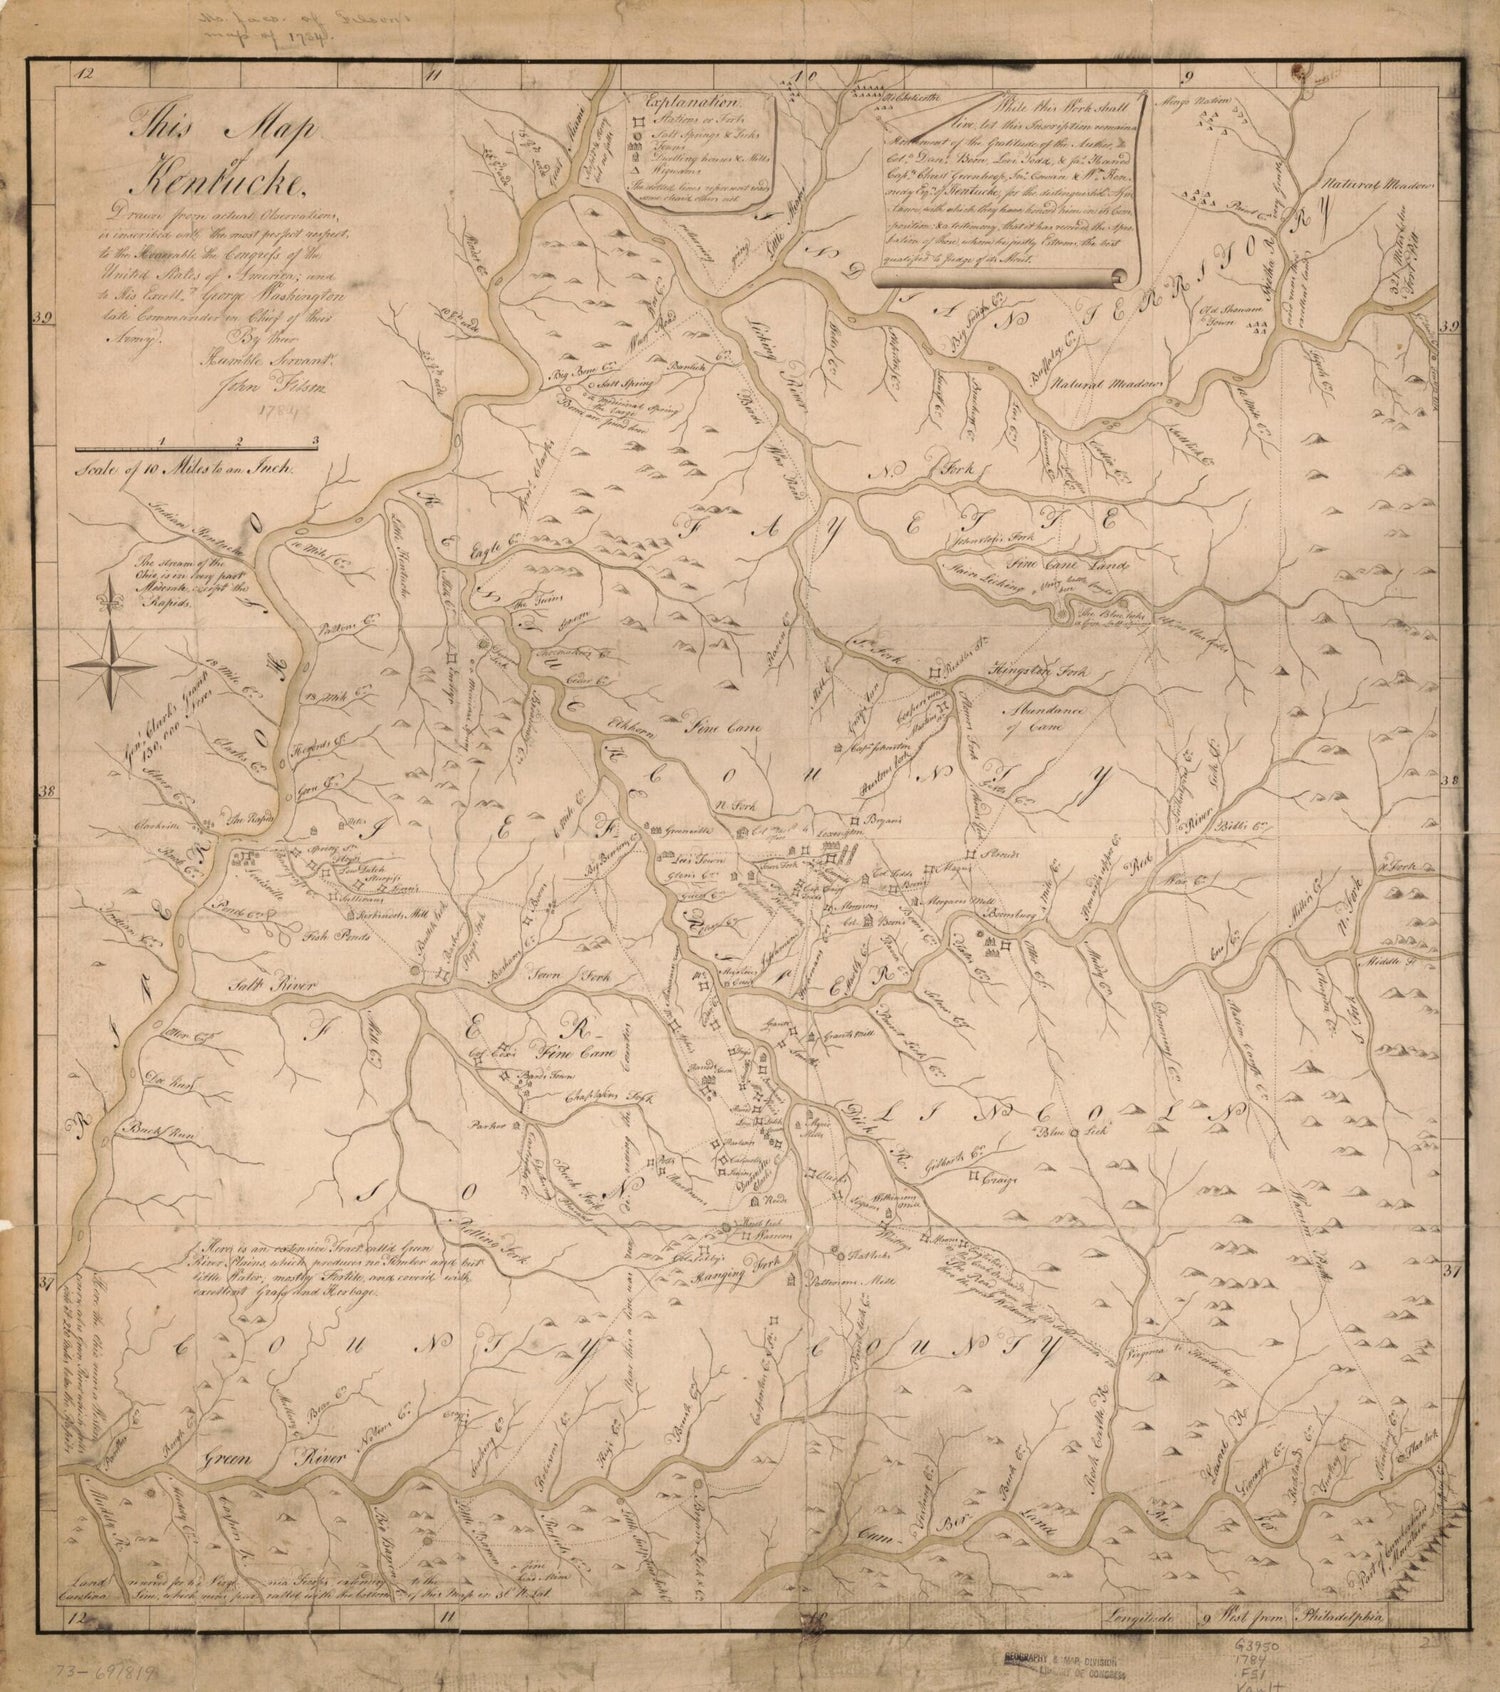 This old map of This Map of Kentucke from 1800 was created by John Filson in 1800